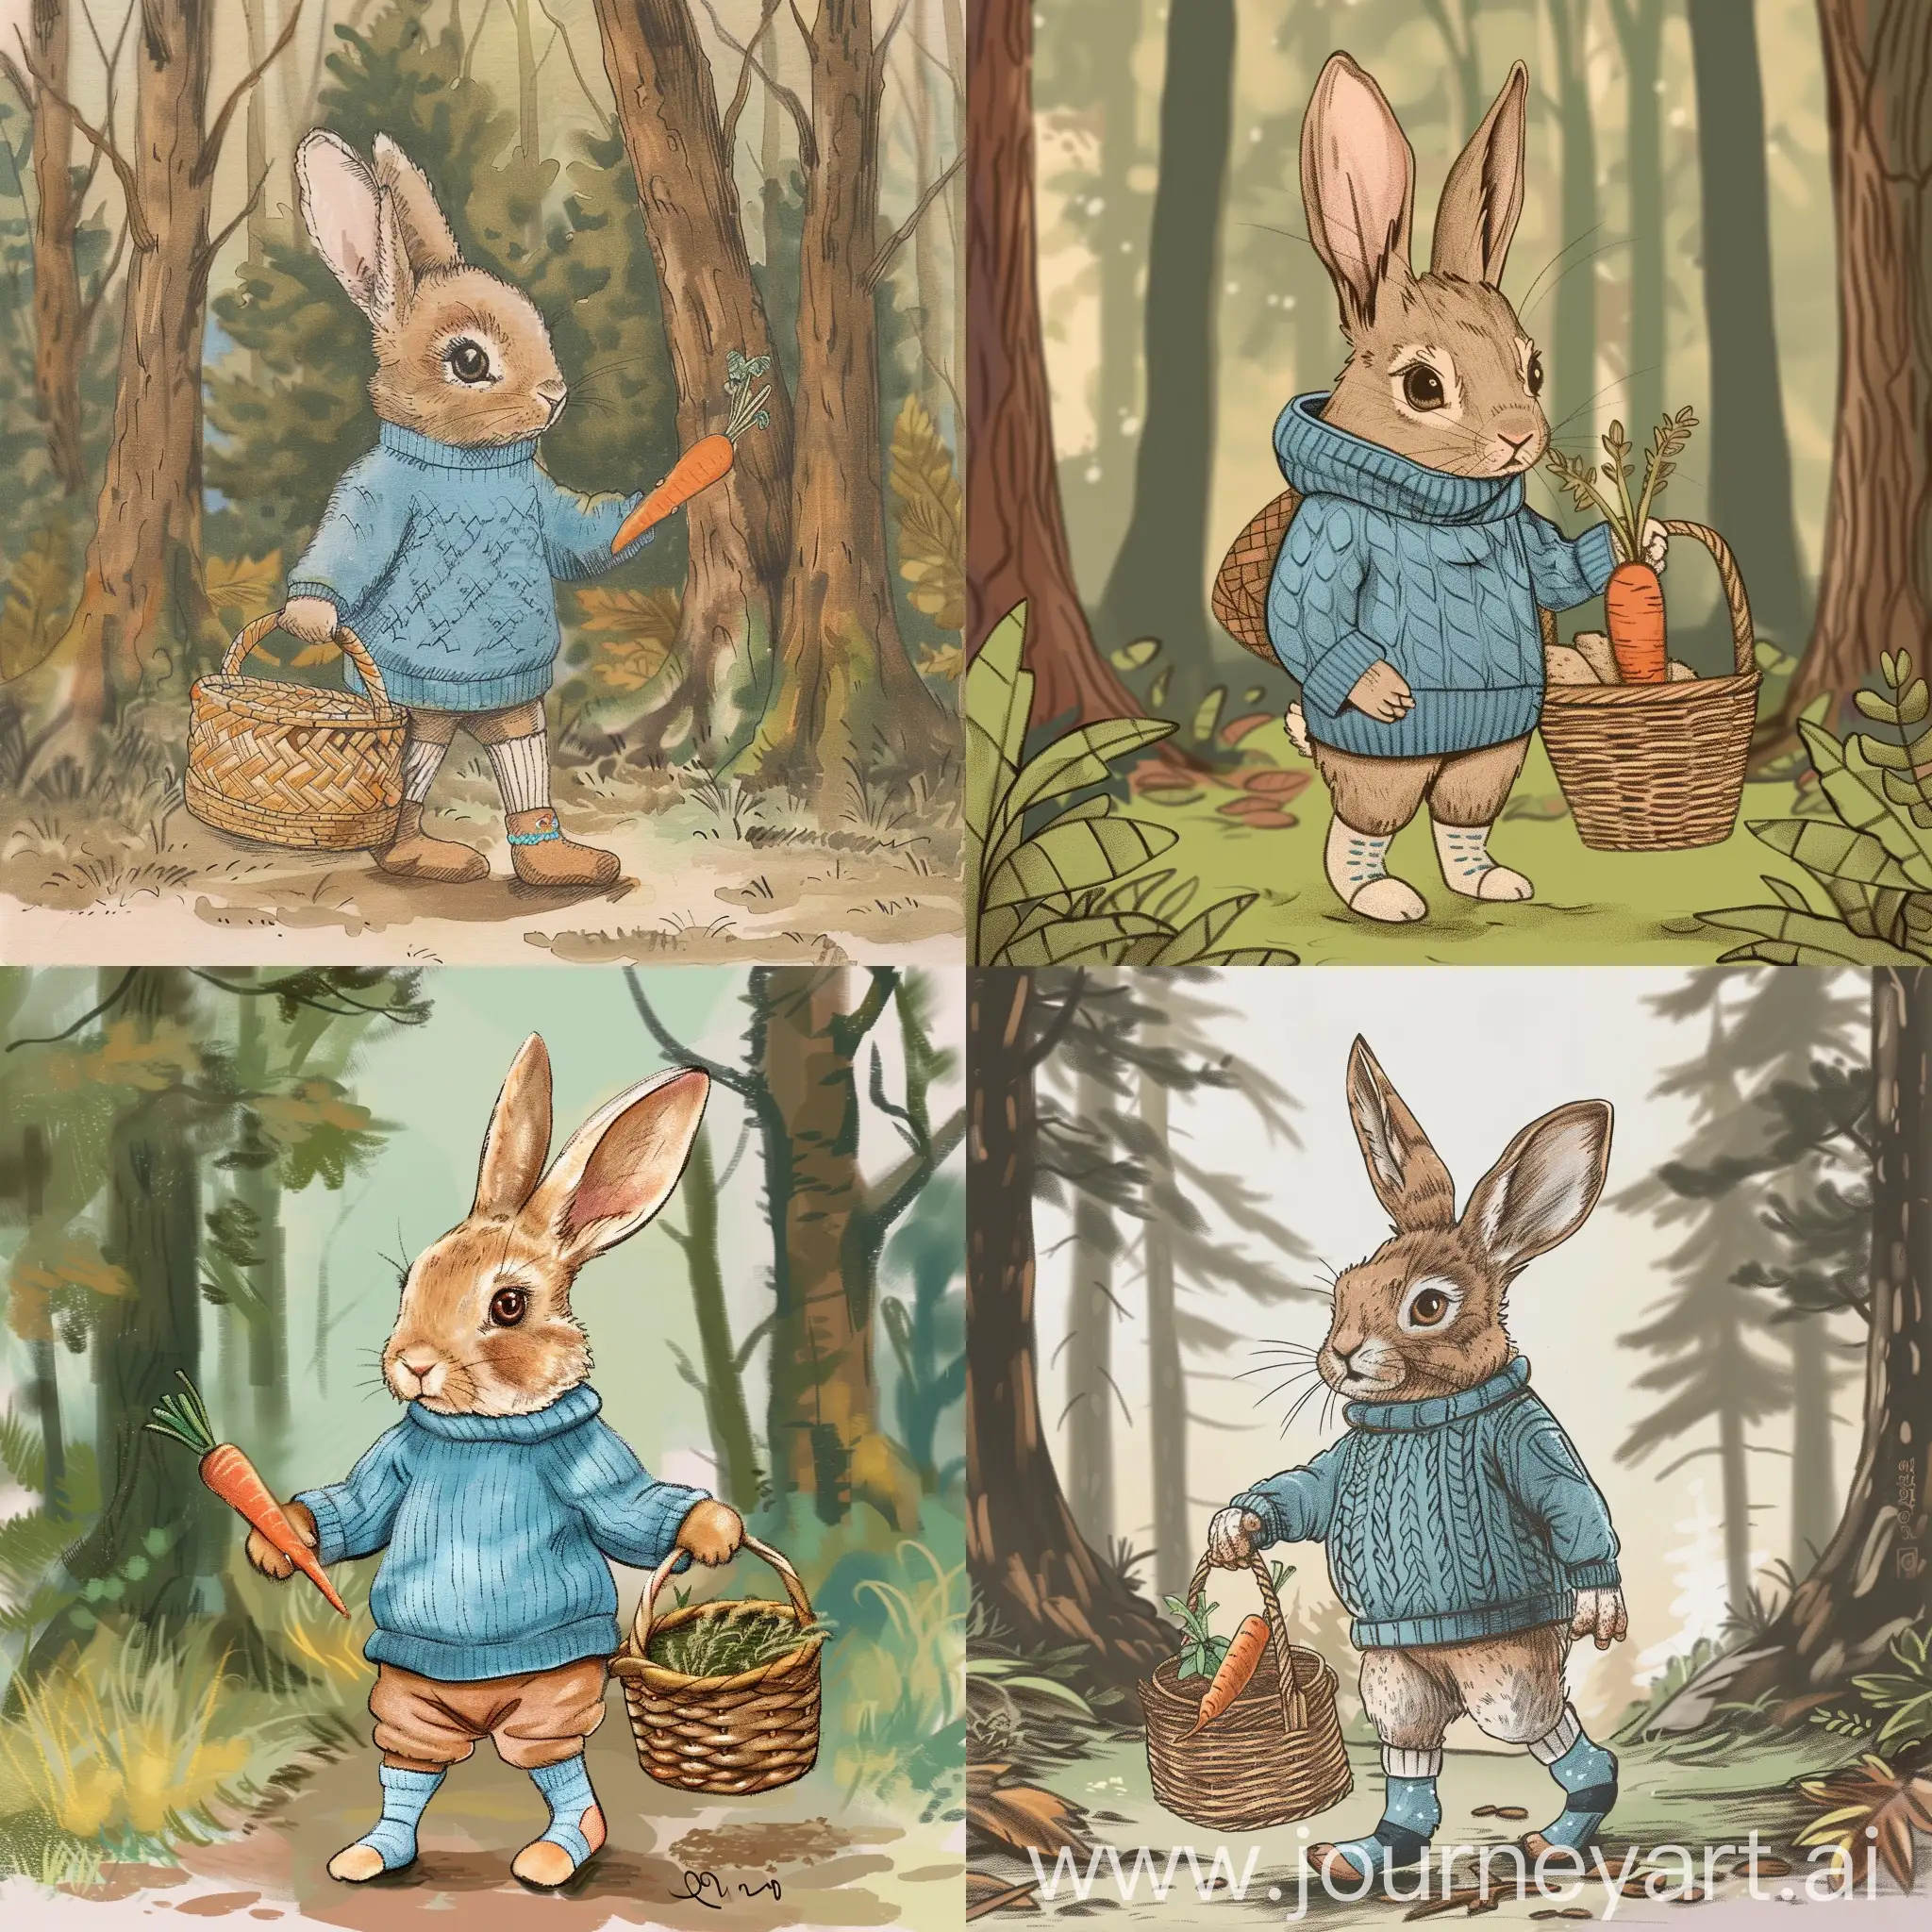 Adorable-Rabbit-in-Blue-Sweater-with-Basket-in-Forest